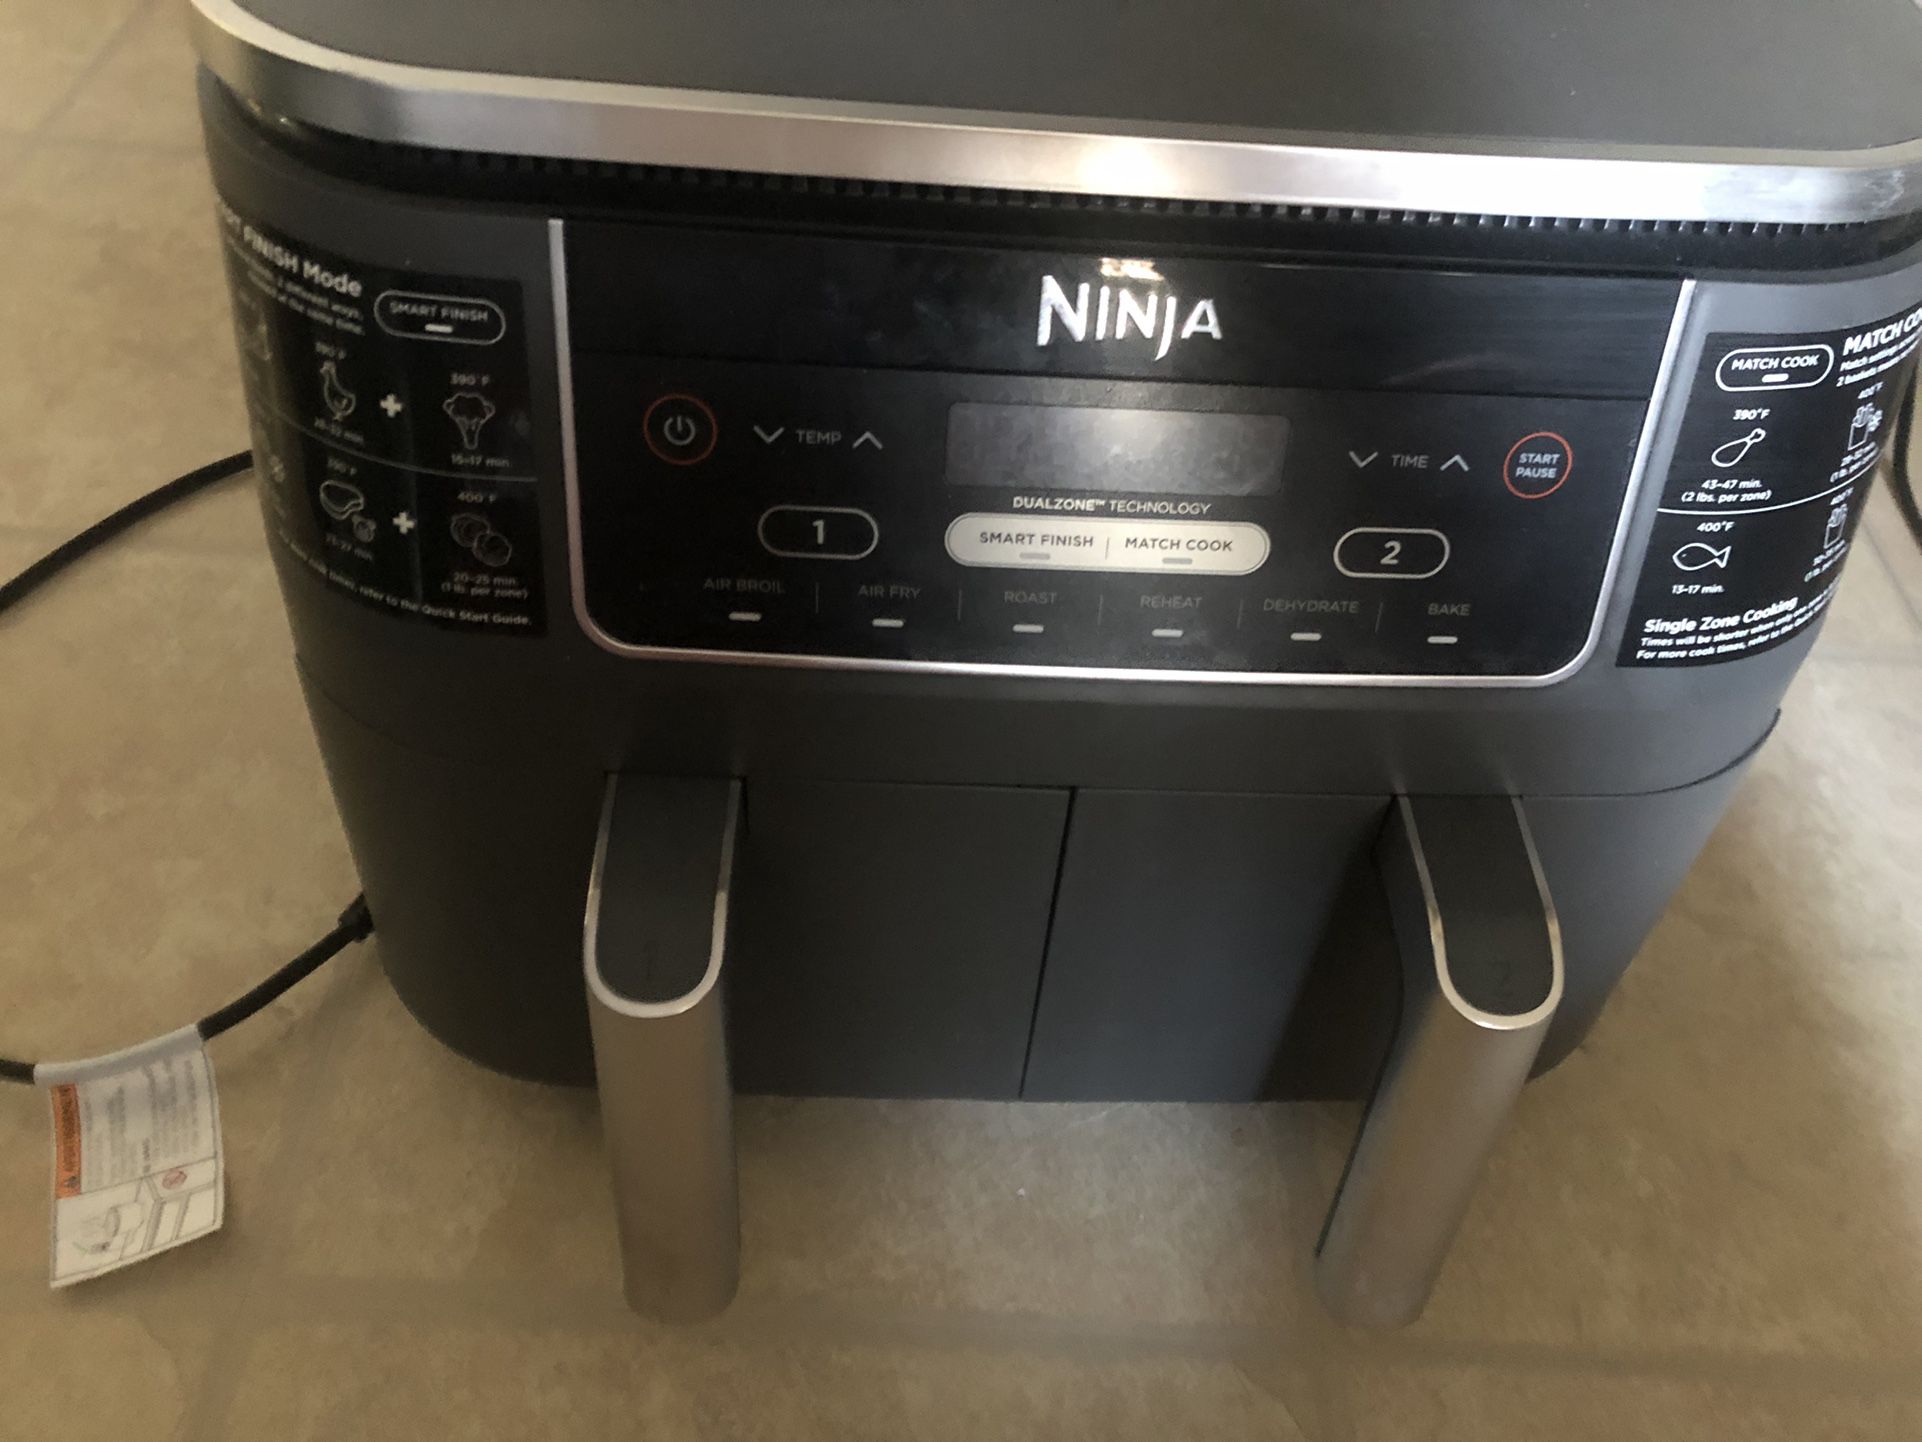  Ninja DZ401 Foodi 10 Quart 6-in-1 DualZone XL 2-Basket Air Fryer  with 2 Independent Frying Baskets, Match Cook & Smart Finish to Roast,  Broil, Dehydrate for Quick, Easy Family-Sized Meals, Grey 